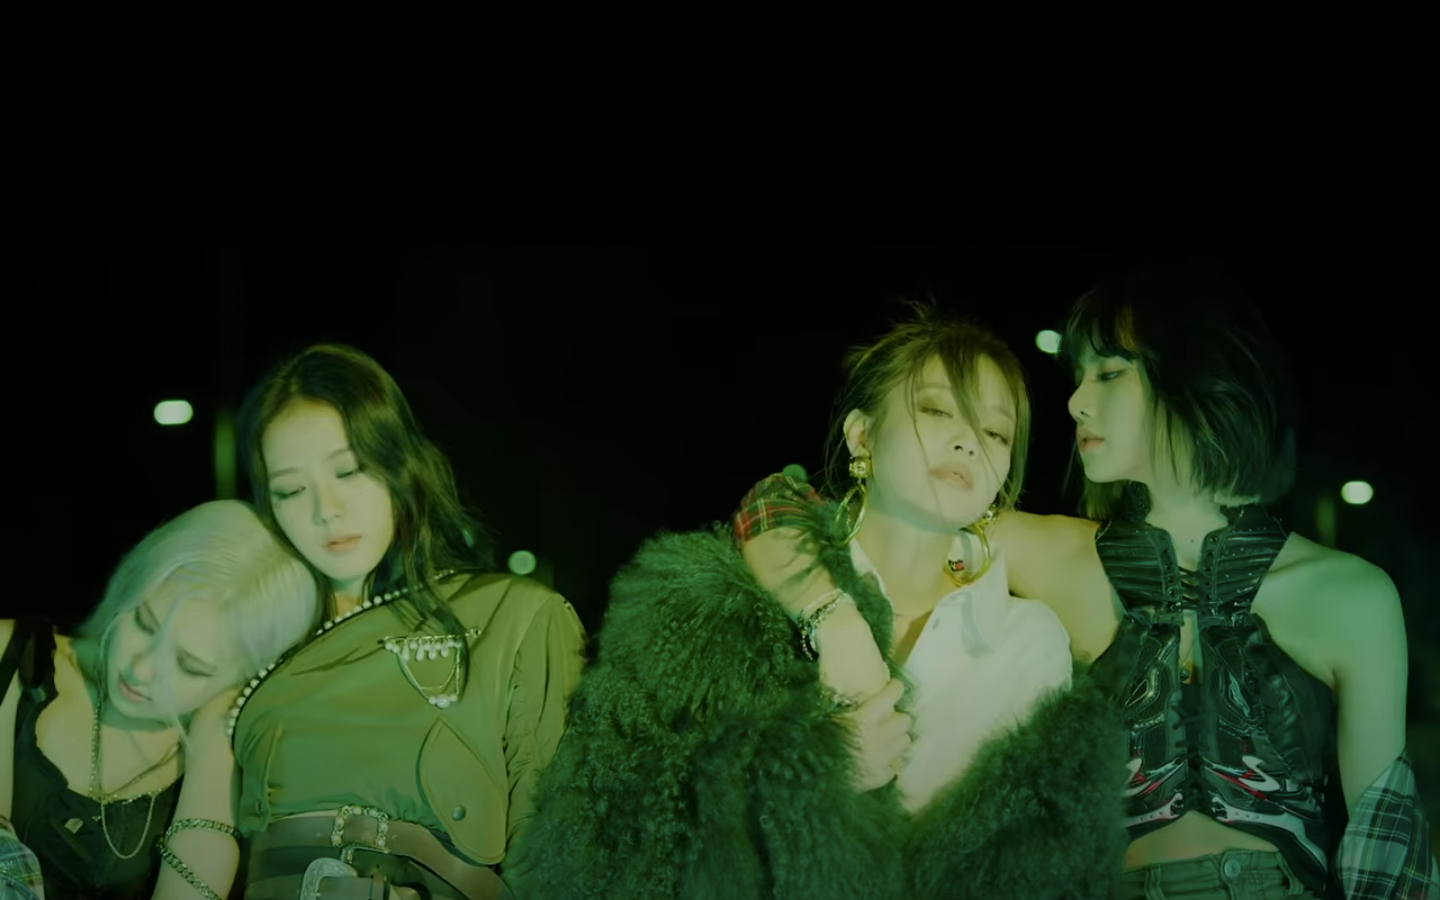 Watch The Concept Teaser Video For Blackpink's Newest Single, “Lovesick Girls”